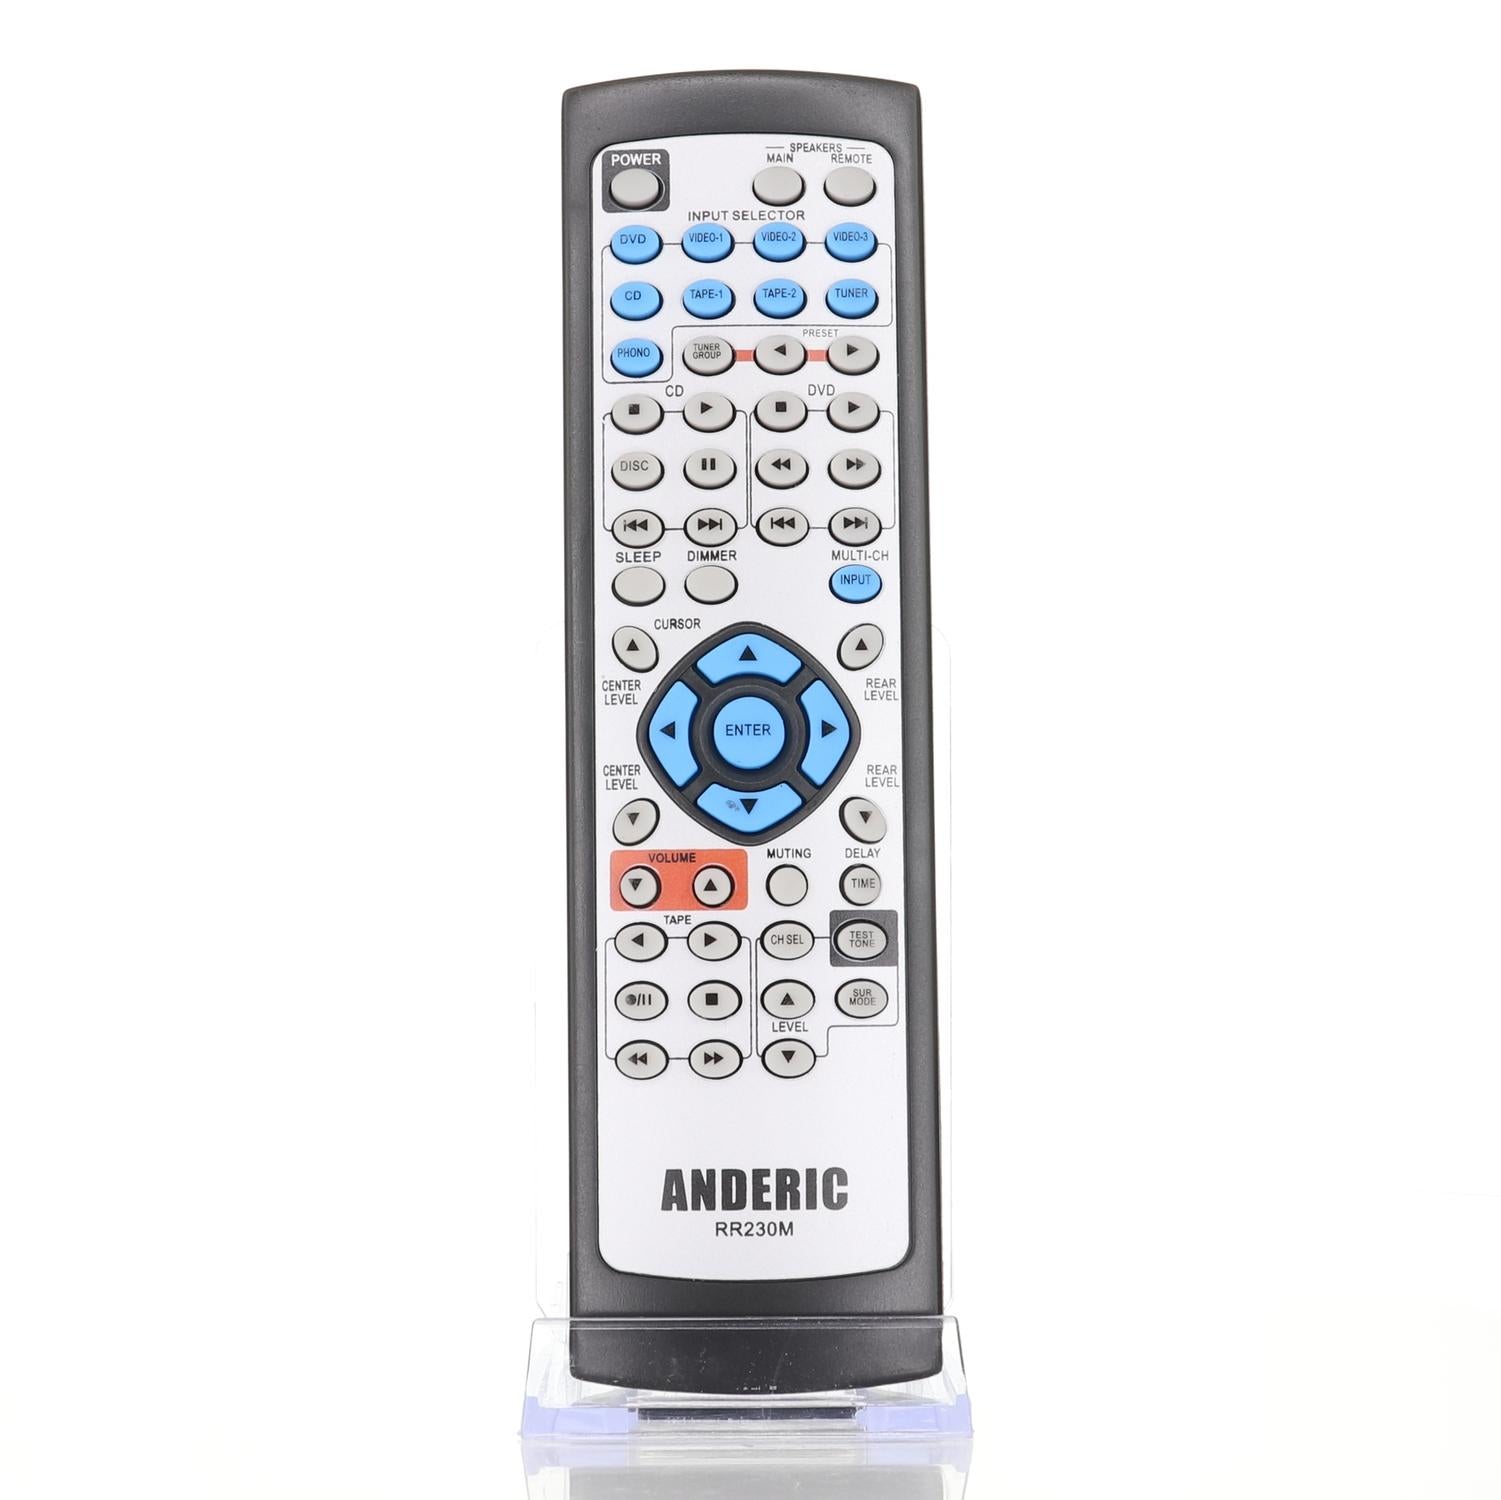 RR230M (RC230M) Remote Control for Onkyo® Audio Video Systems